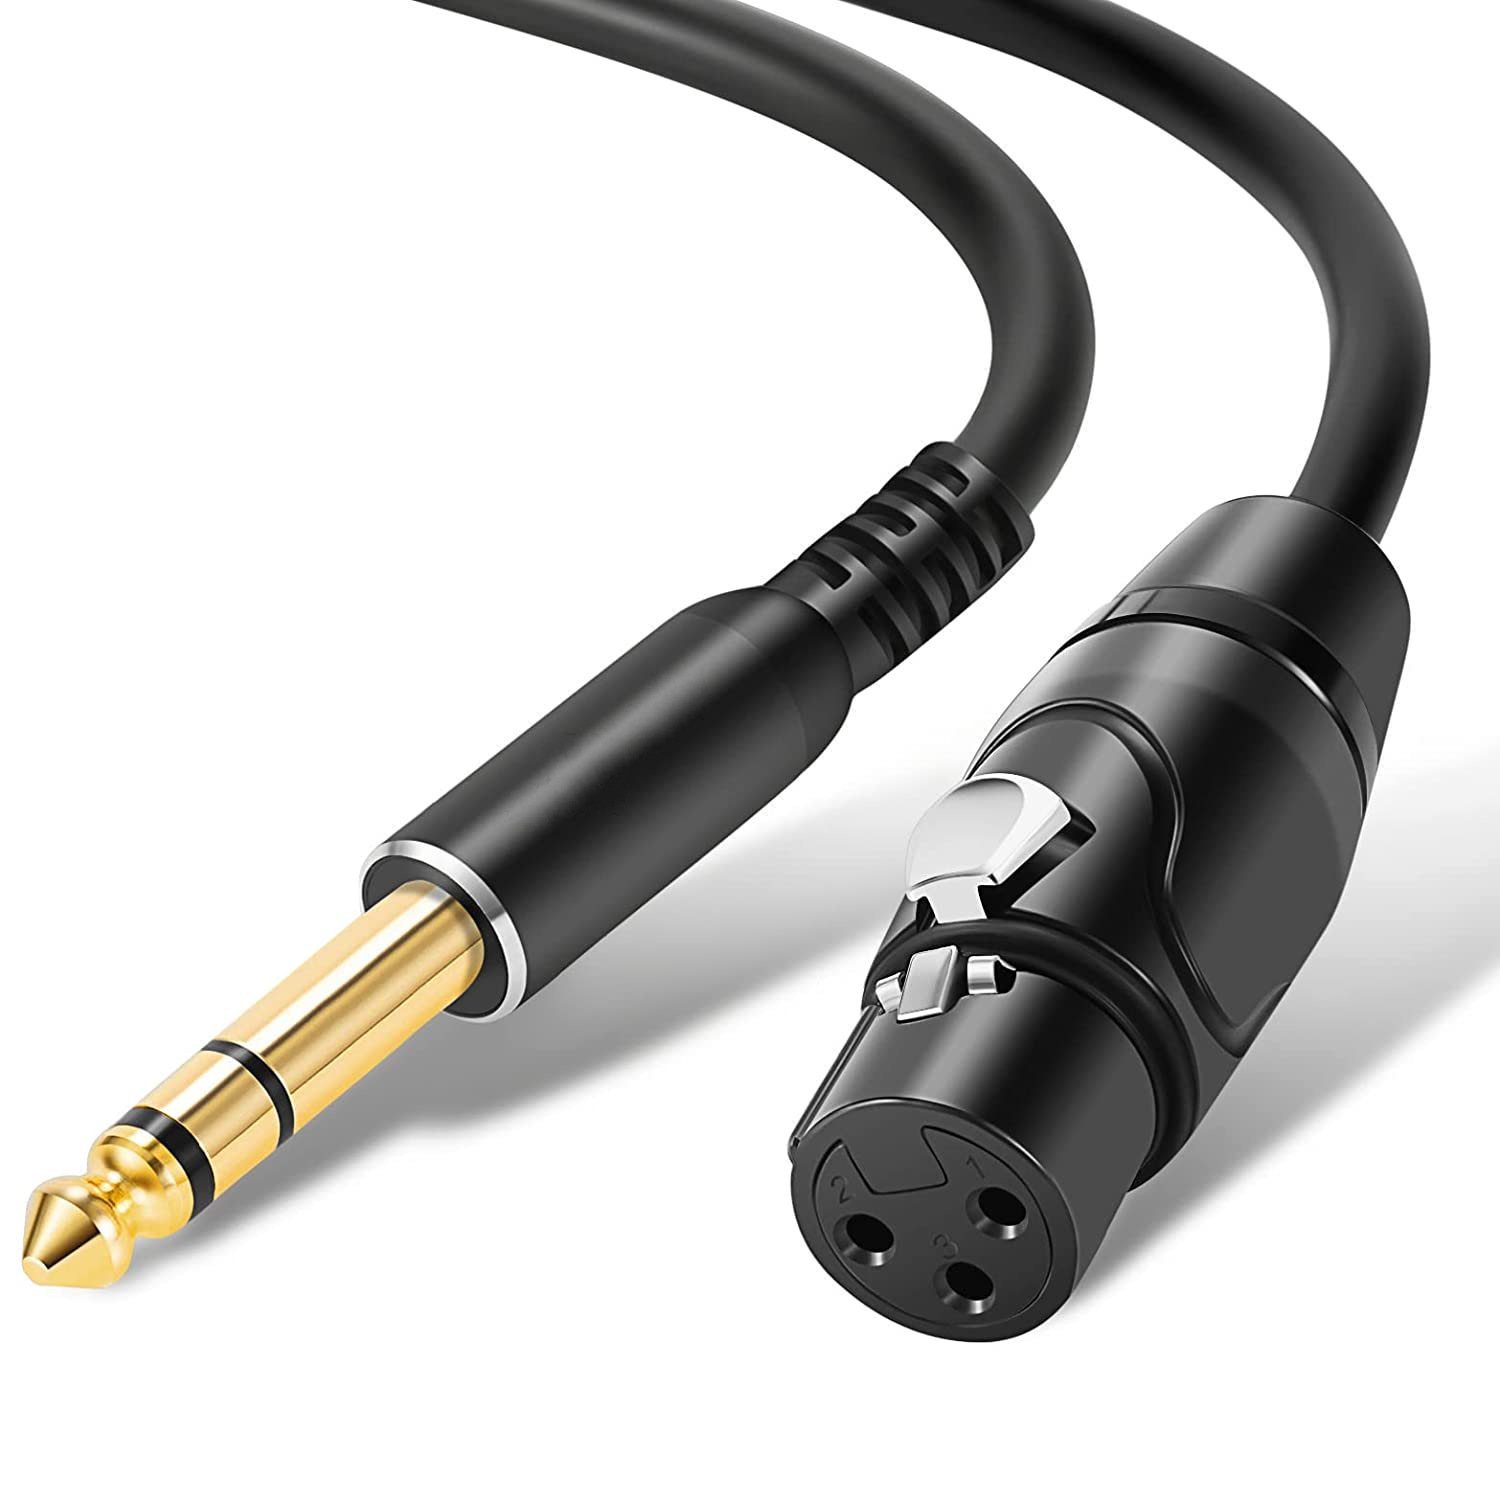 RCA to XLR Cable, Dual RCA Male to Dual XLR Male Cable, 2 RCA Male to 2 XLR Male HiFi Audio Cable, 4N OFC Wire, for Amplifier Mixer Microphone, 3.3 Feet-OXIMETERBUY